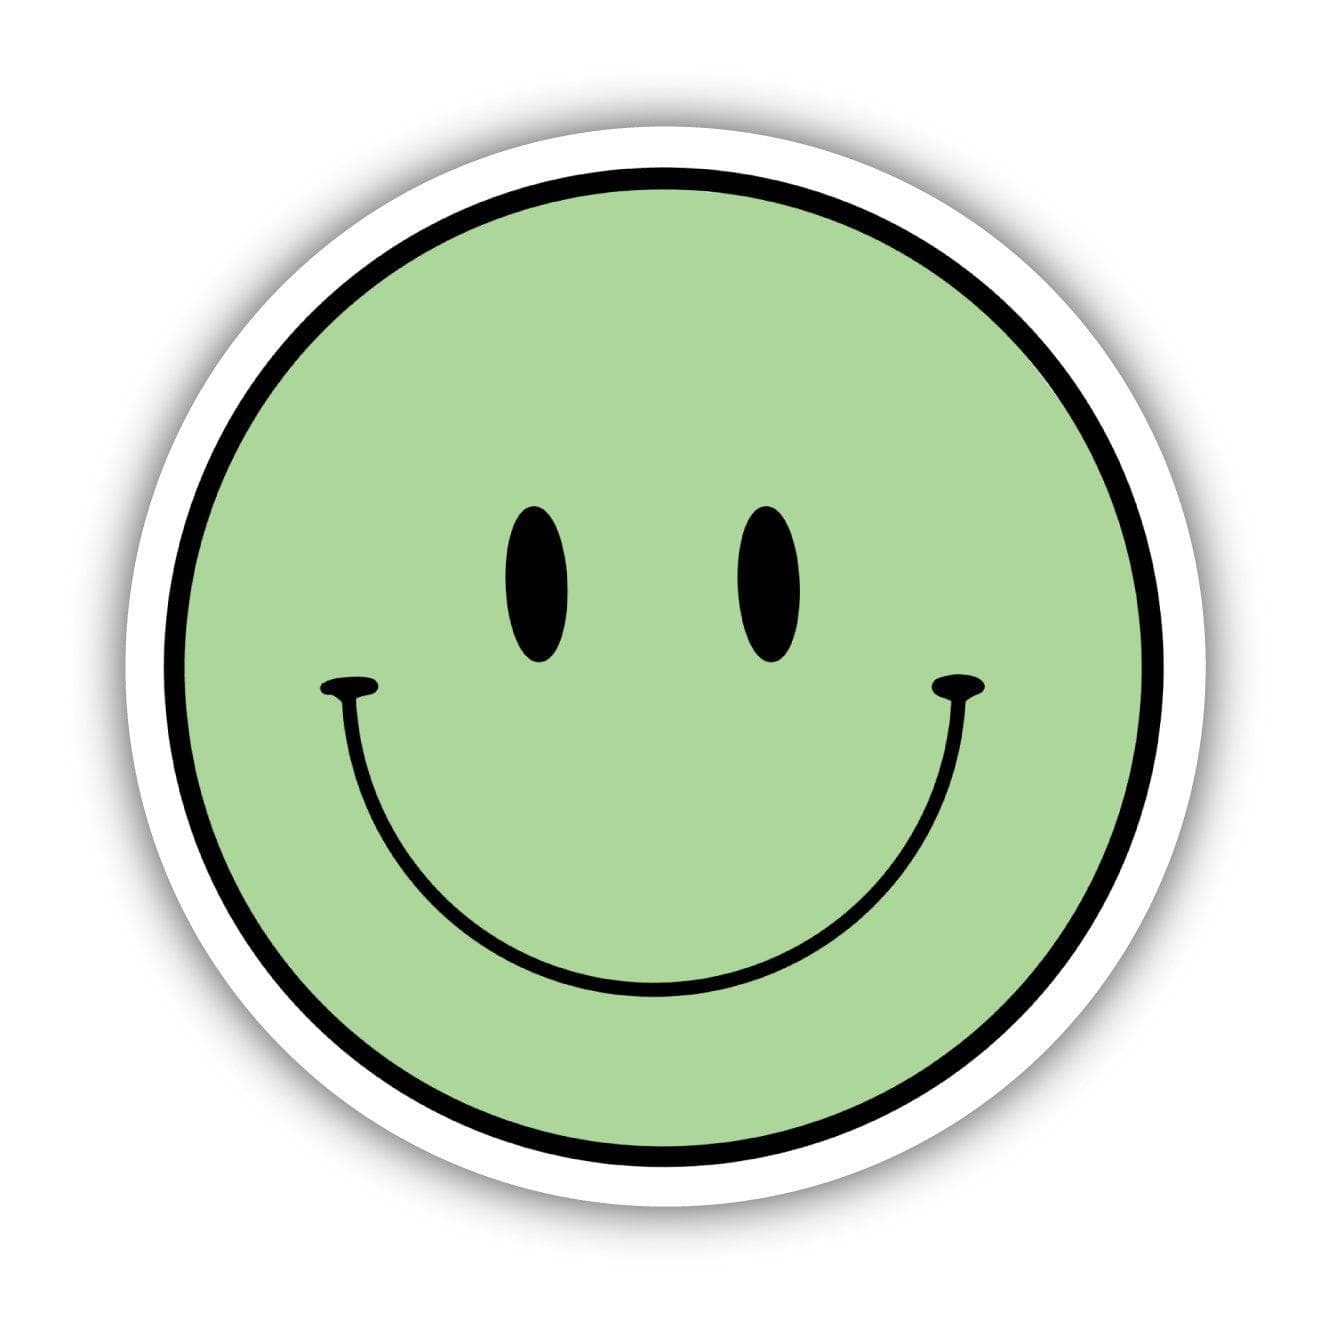 Green Smiley Face Aesthetic Sticker – Big Moods